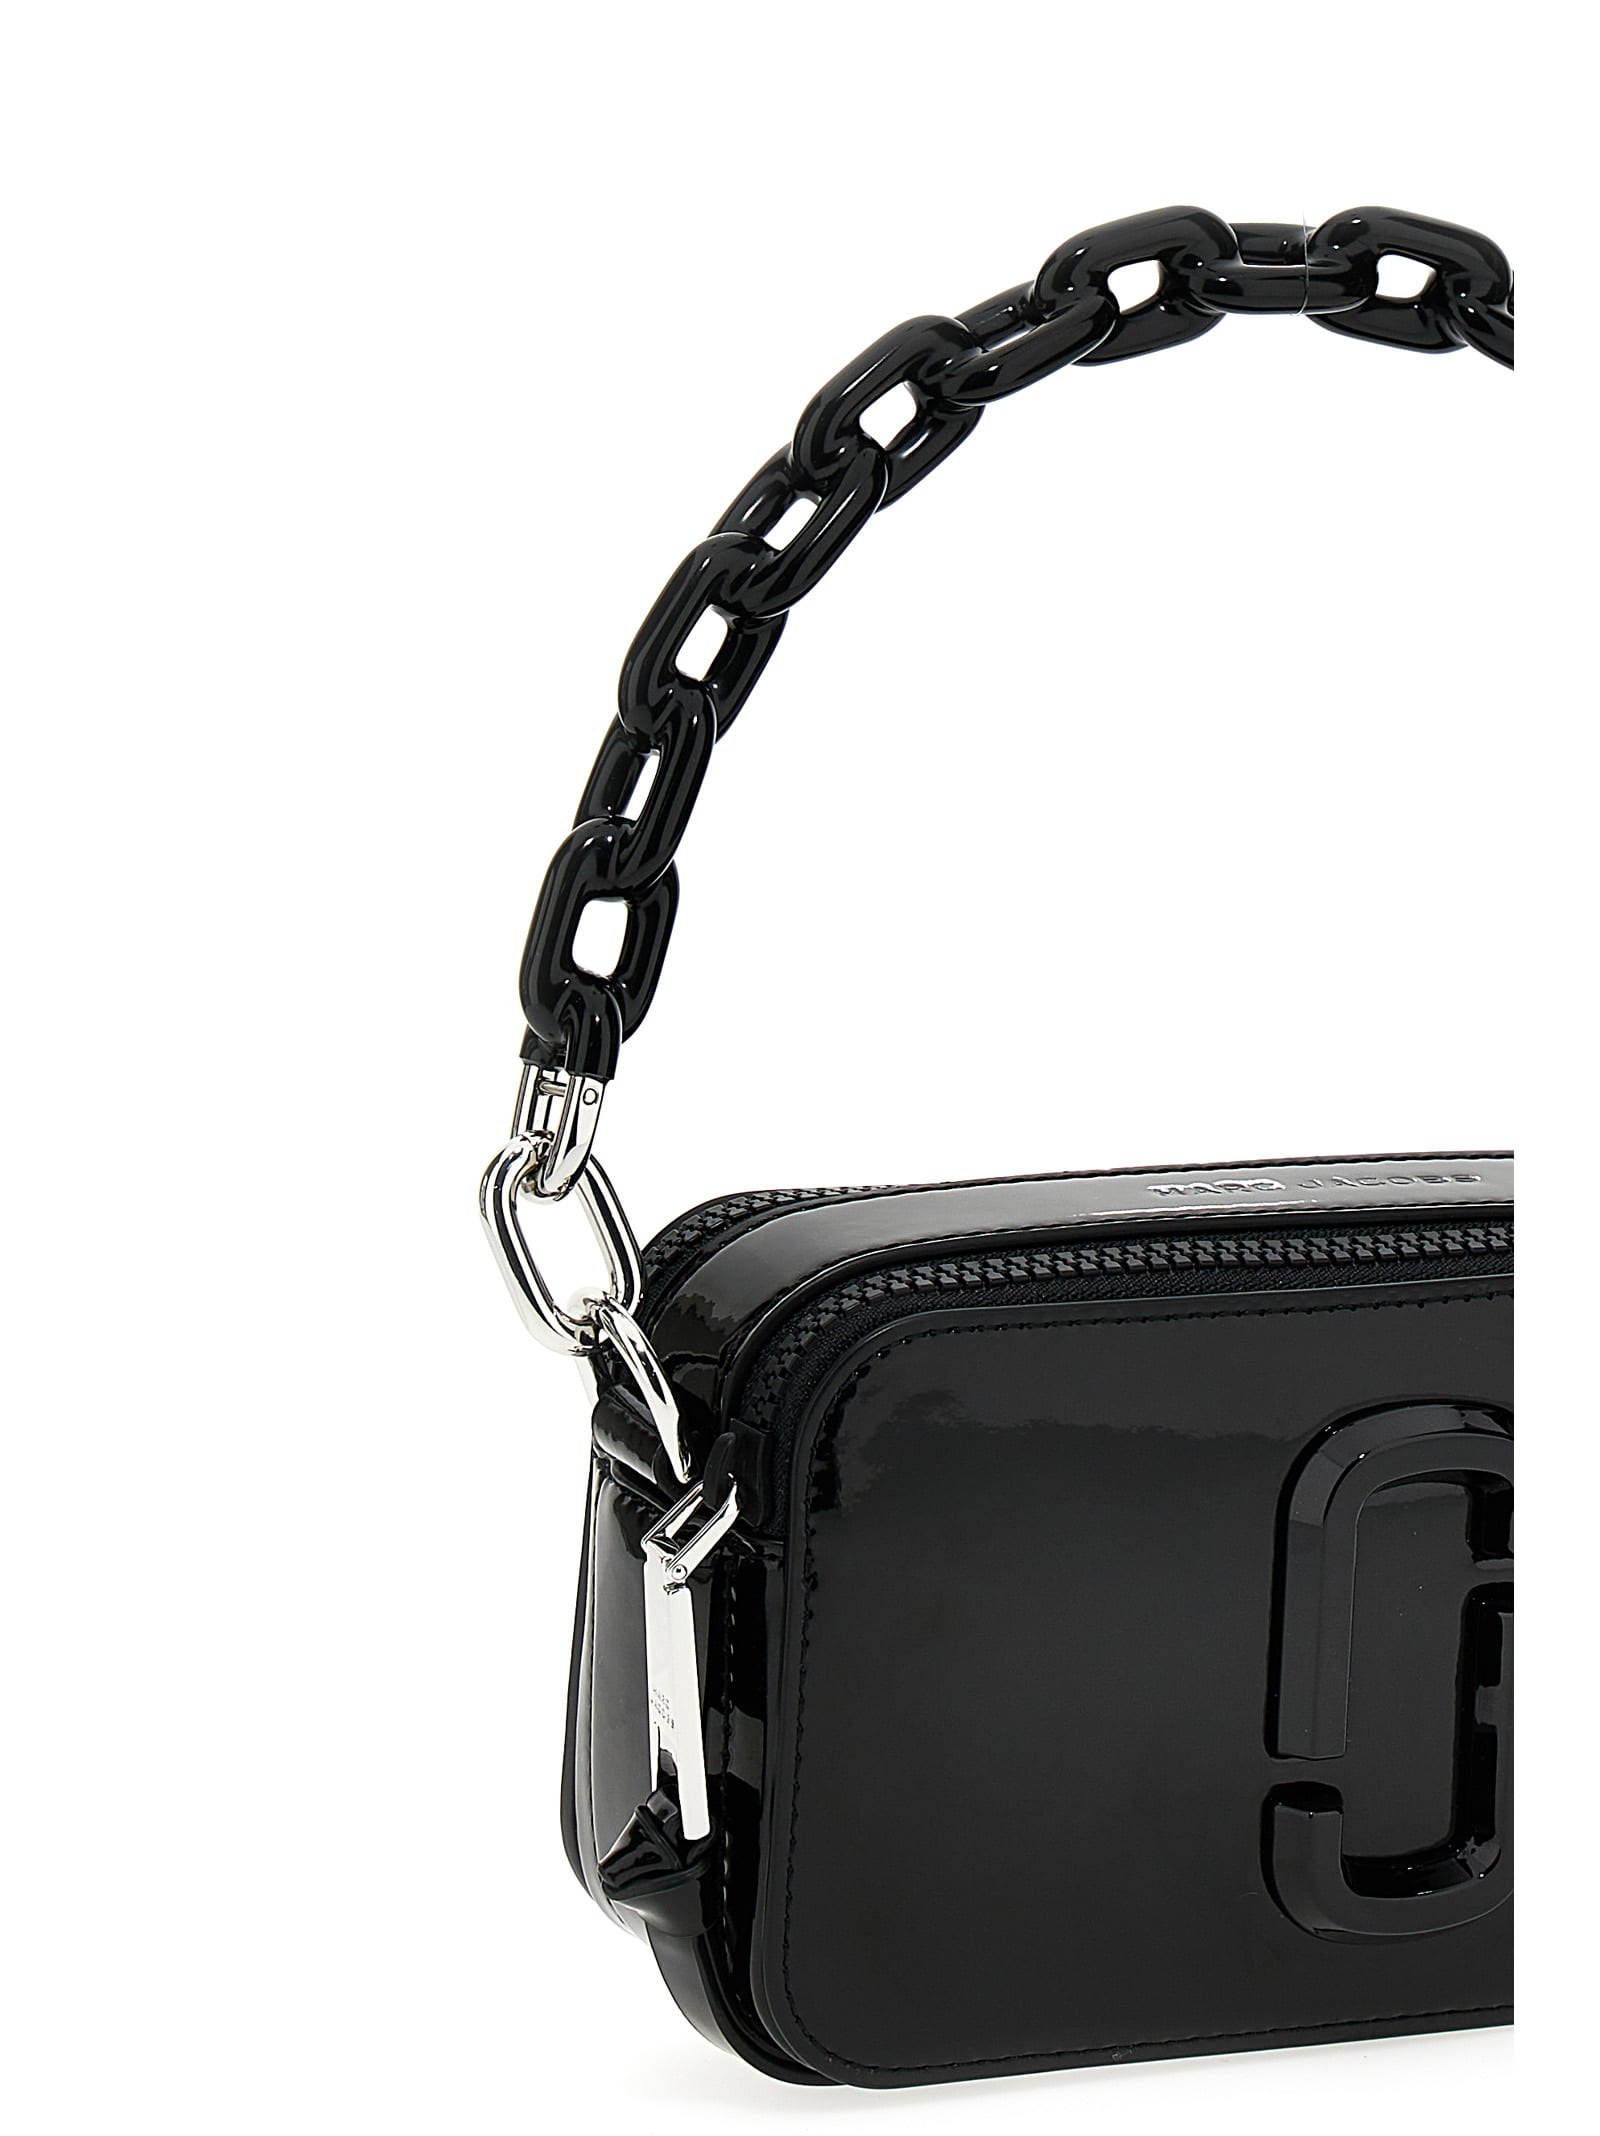 Snapshot patent leather crossbody bag Marc Jacobs Black in Patent